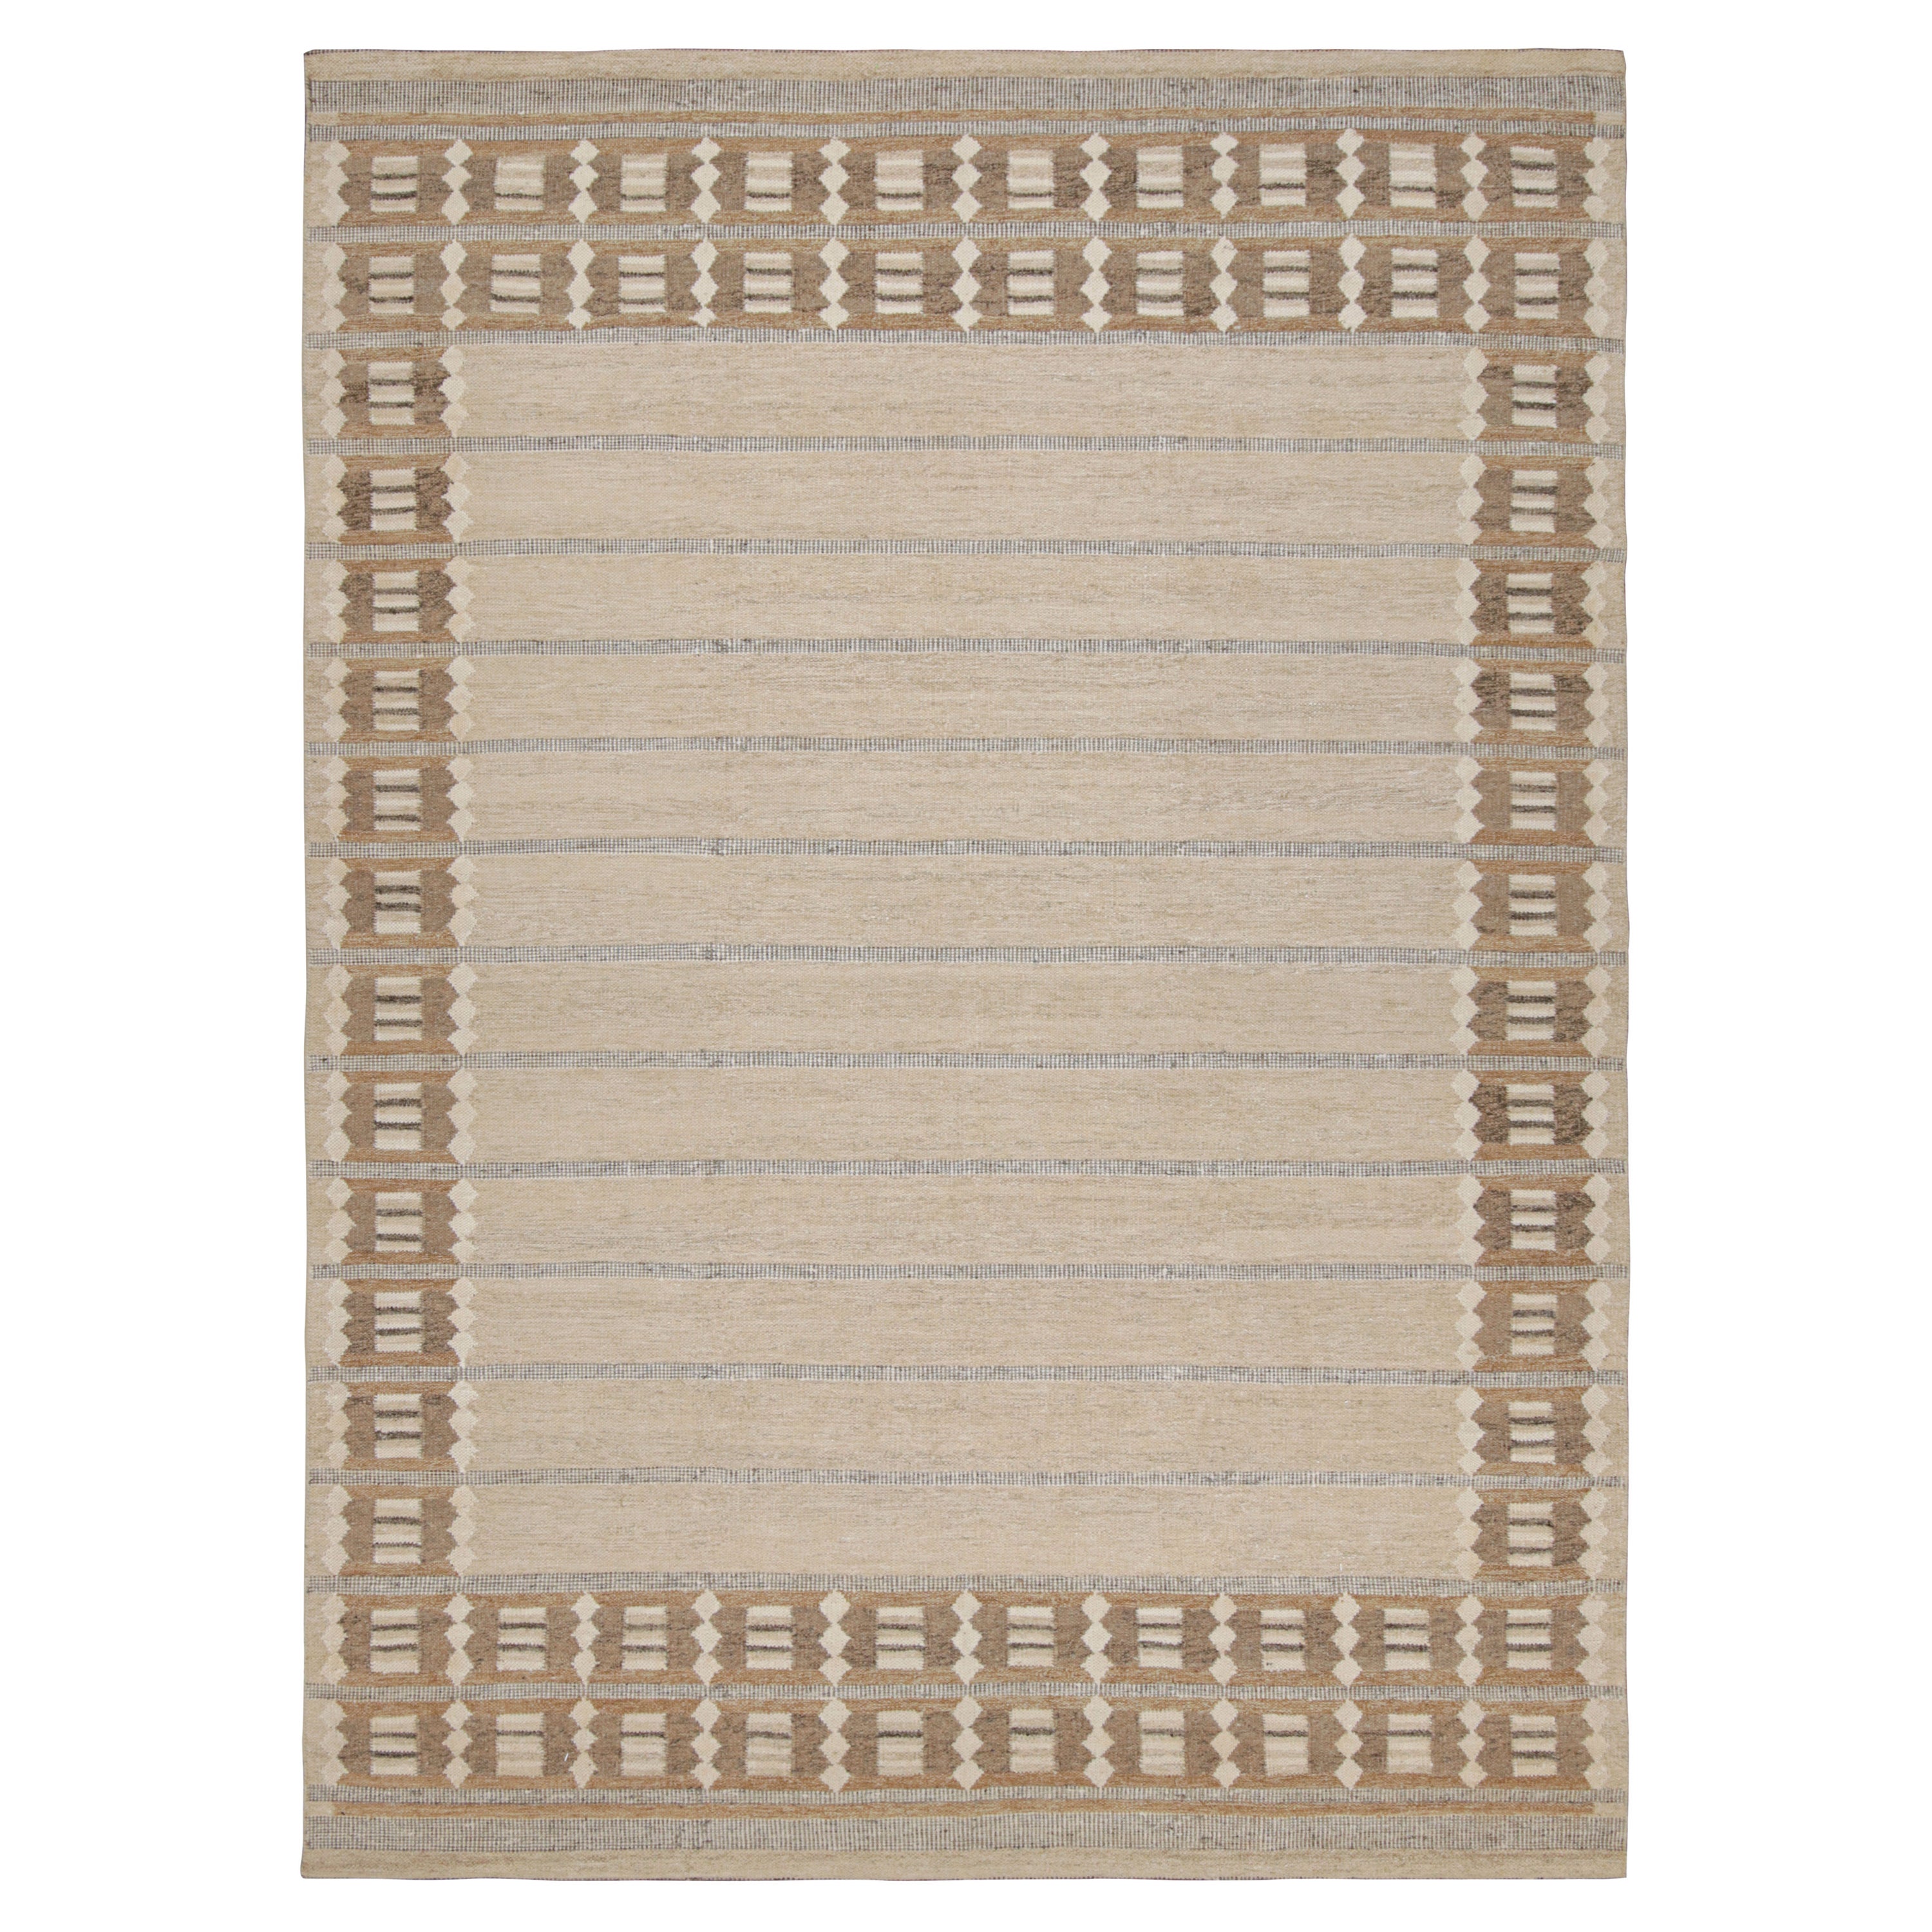 Rug & Kilim’s Scandinavian Style Rug in Beige-Brown With Geometric Patterns For Sale